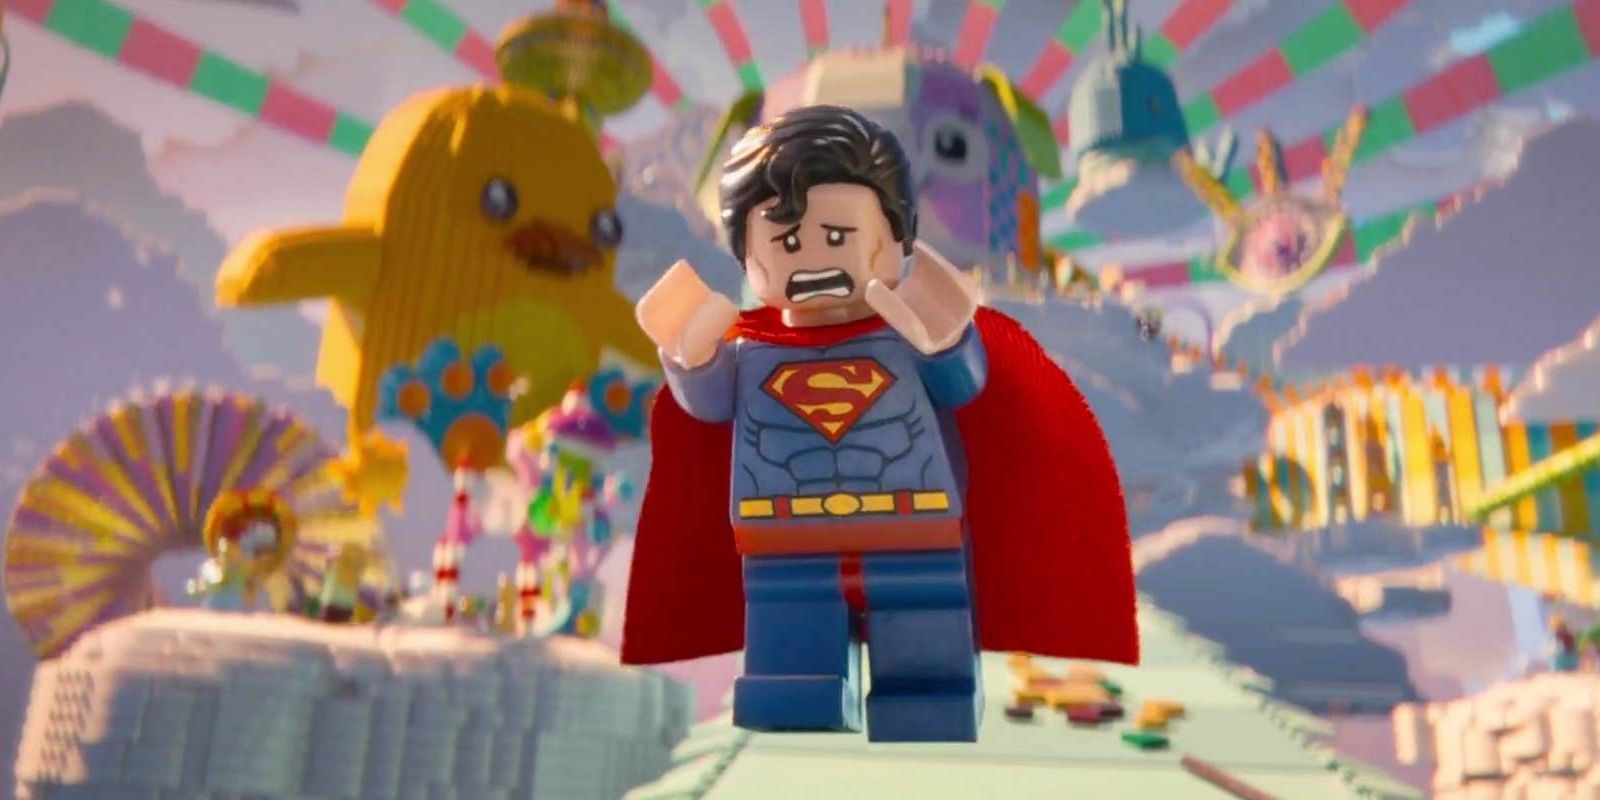 Superman crying in The LEGO Movie